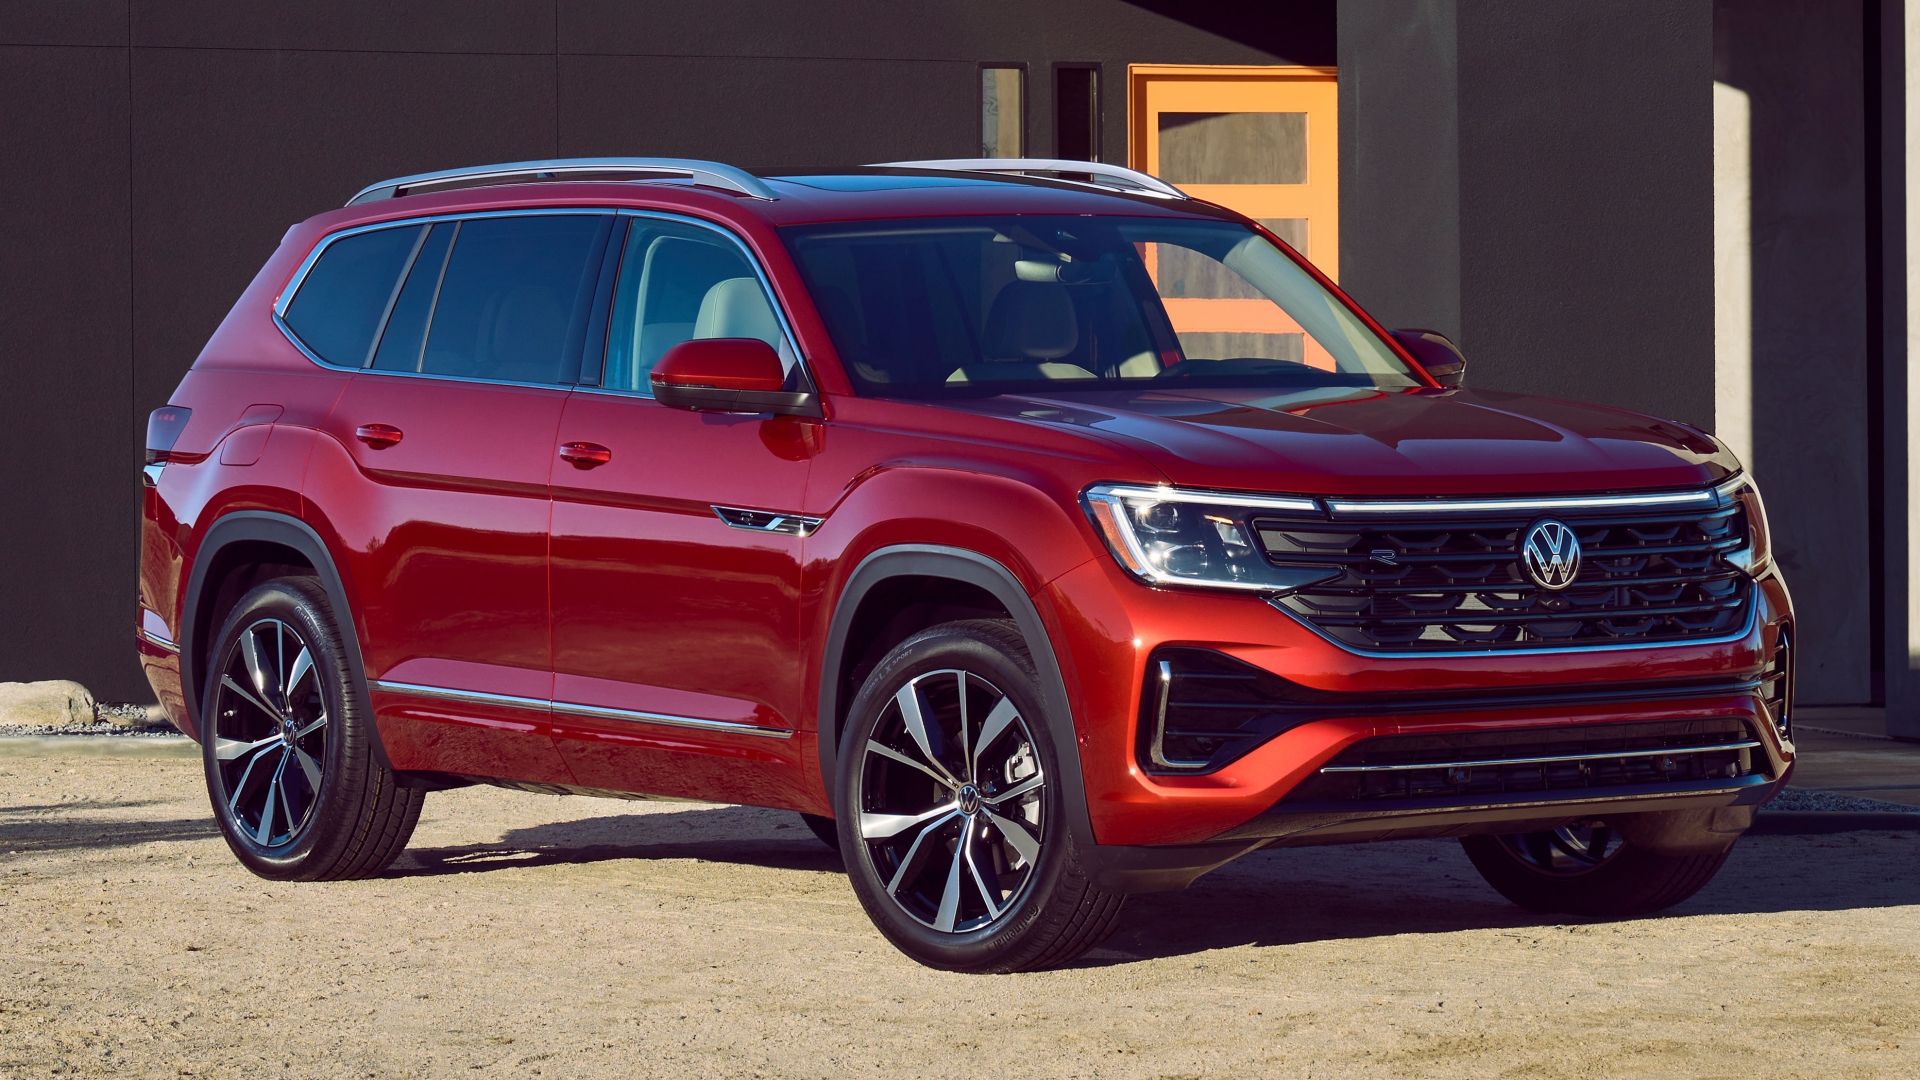 2024 VW Atlas SEL Premium R-Line featuring Aurora Red color shown outside a house in front three quarter angle